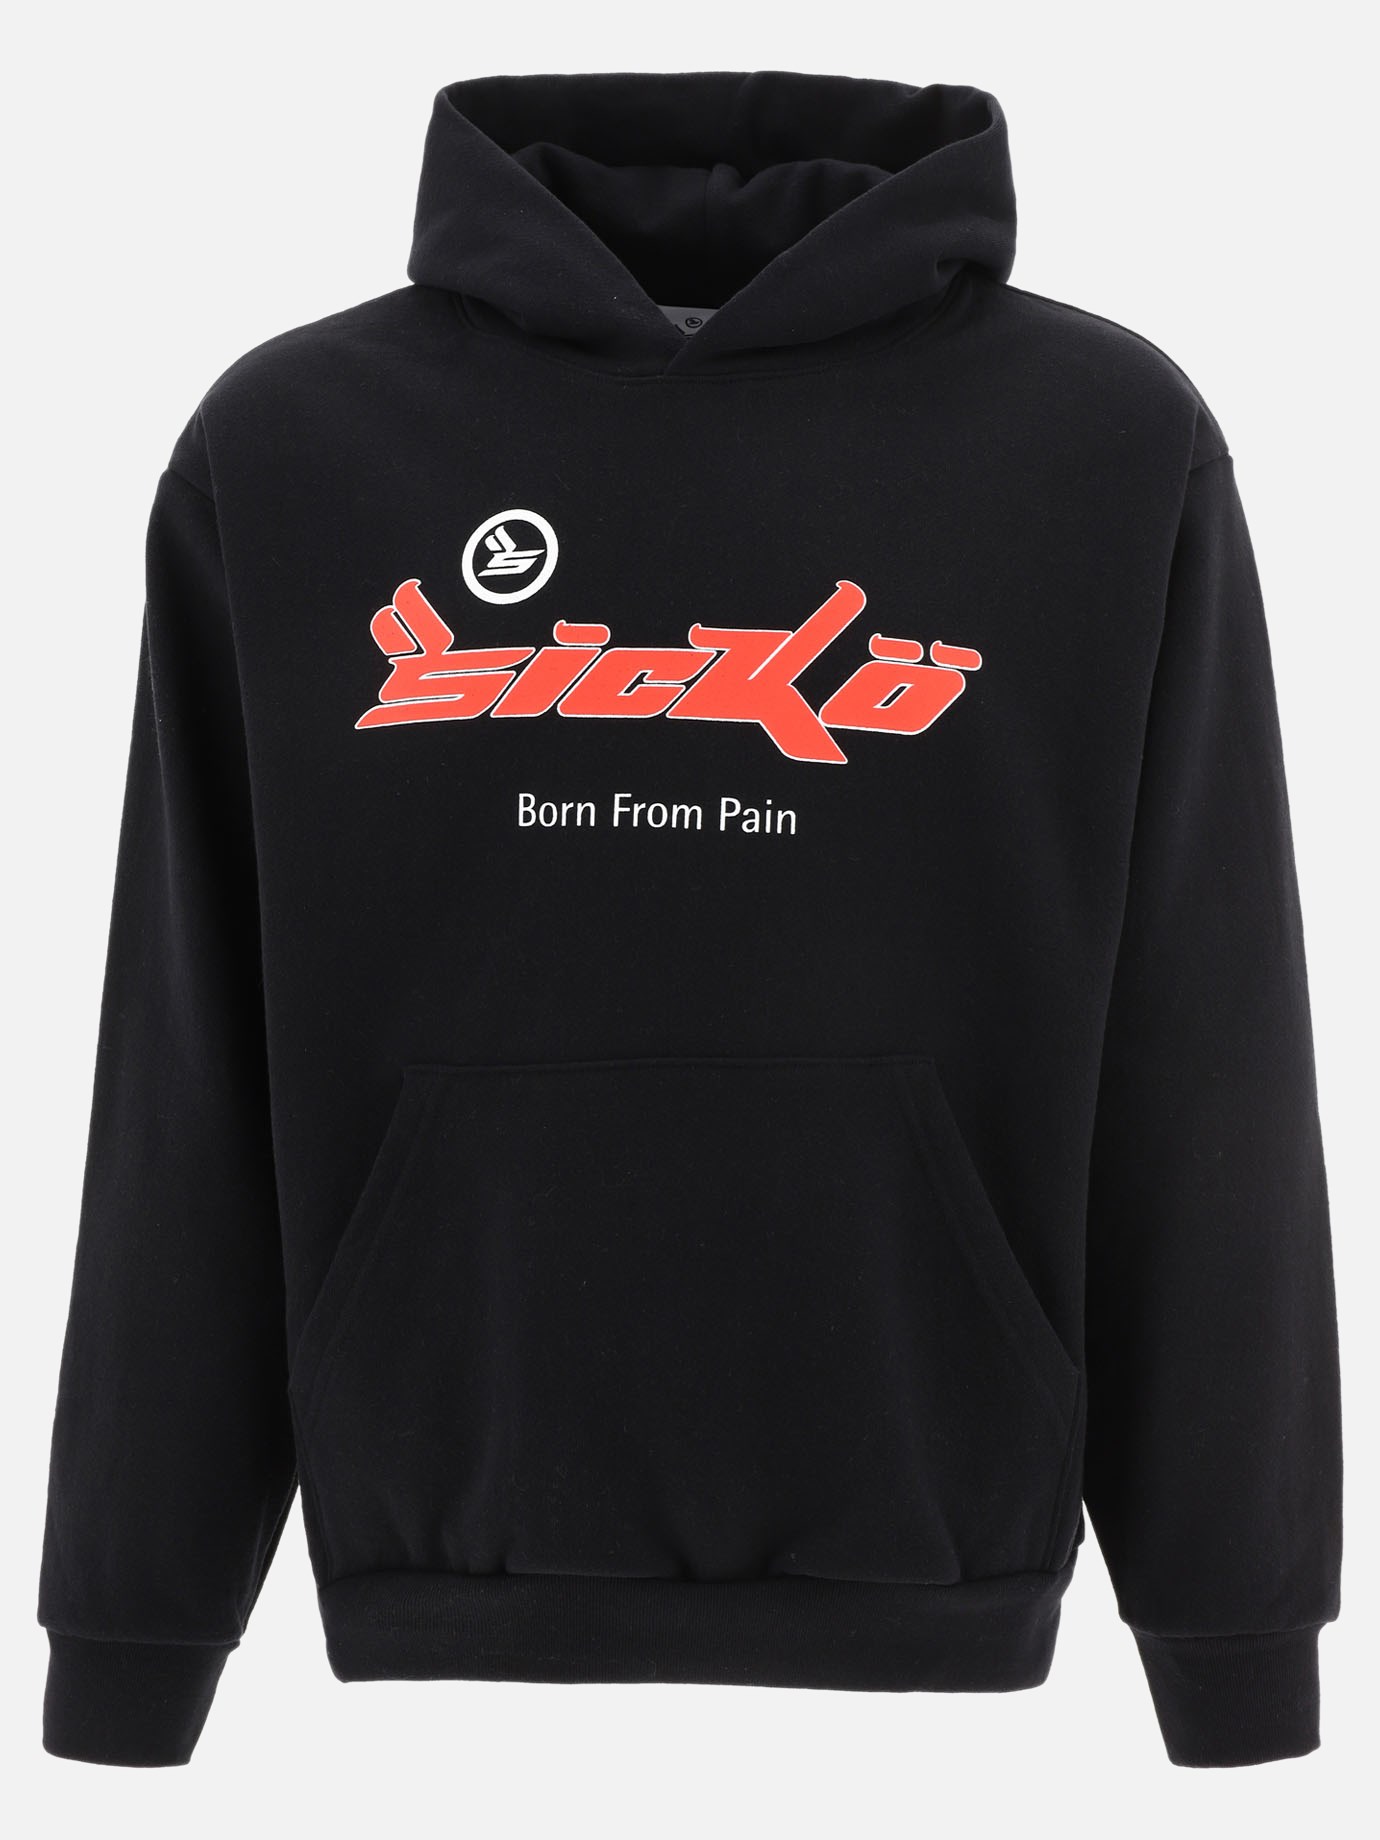  Born From Pain  hoodieby Sicko - 3